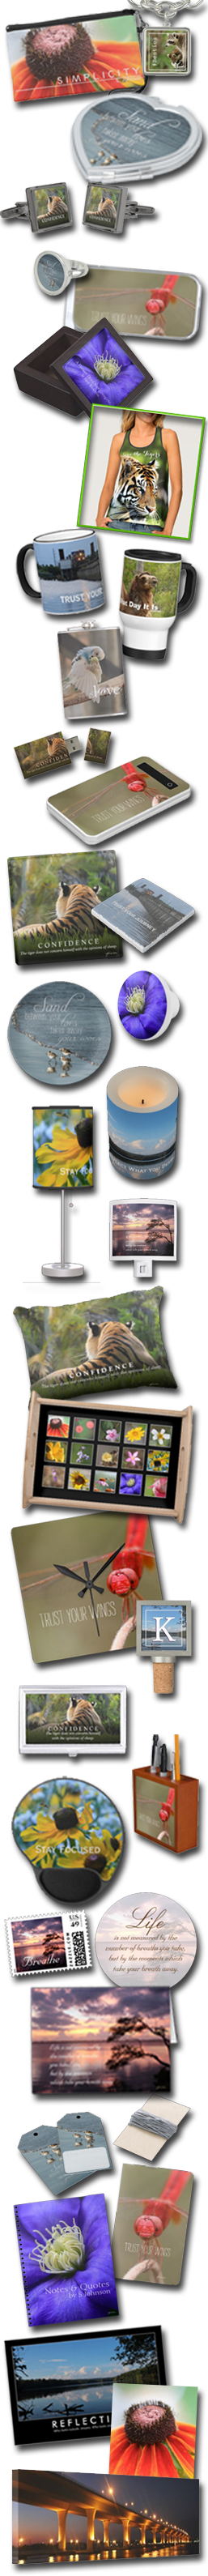 Custom Personalized Products Inspired by Nature Photography